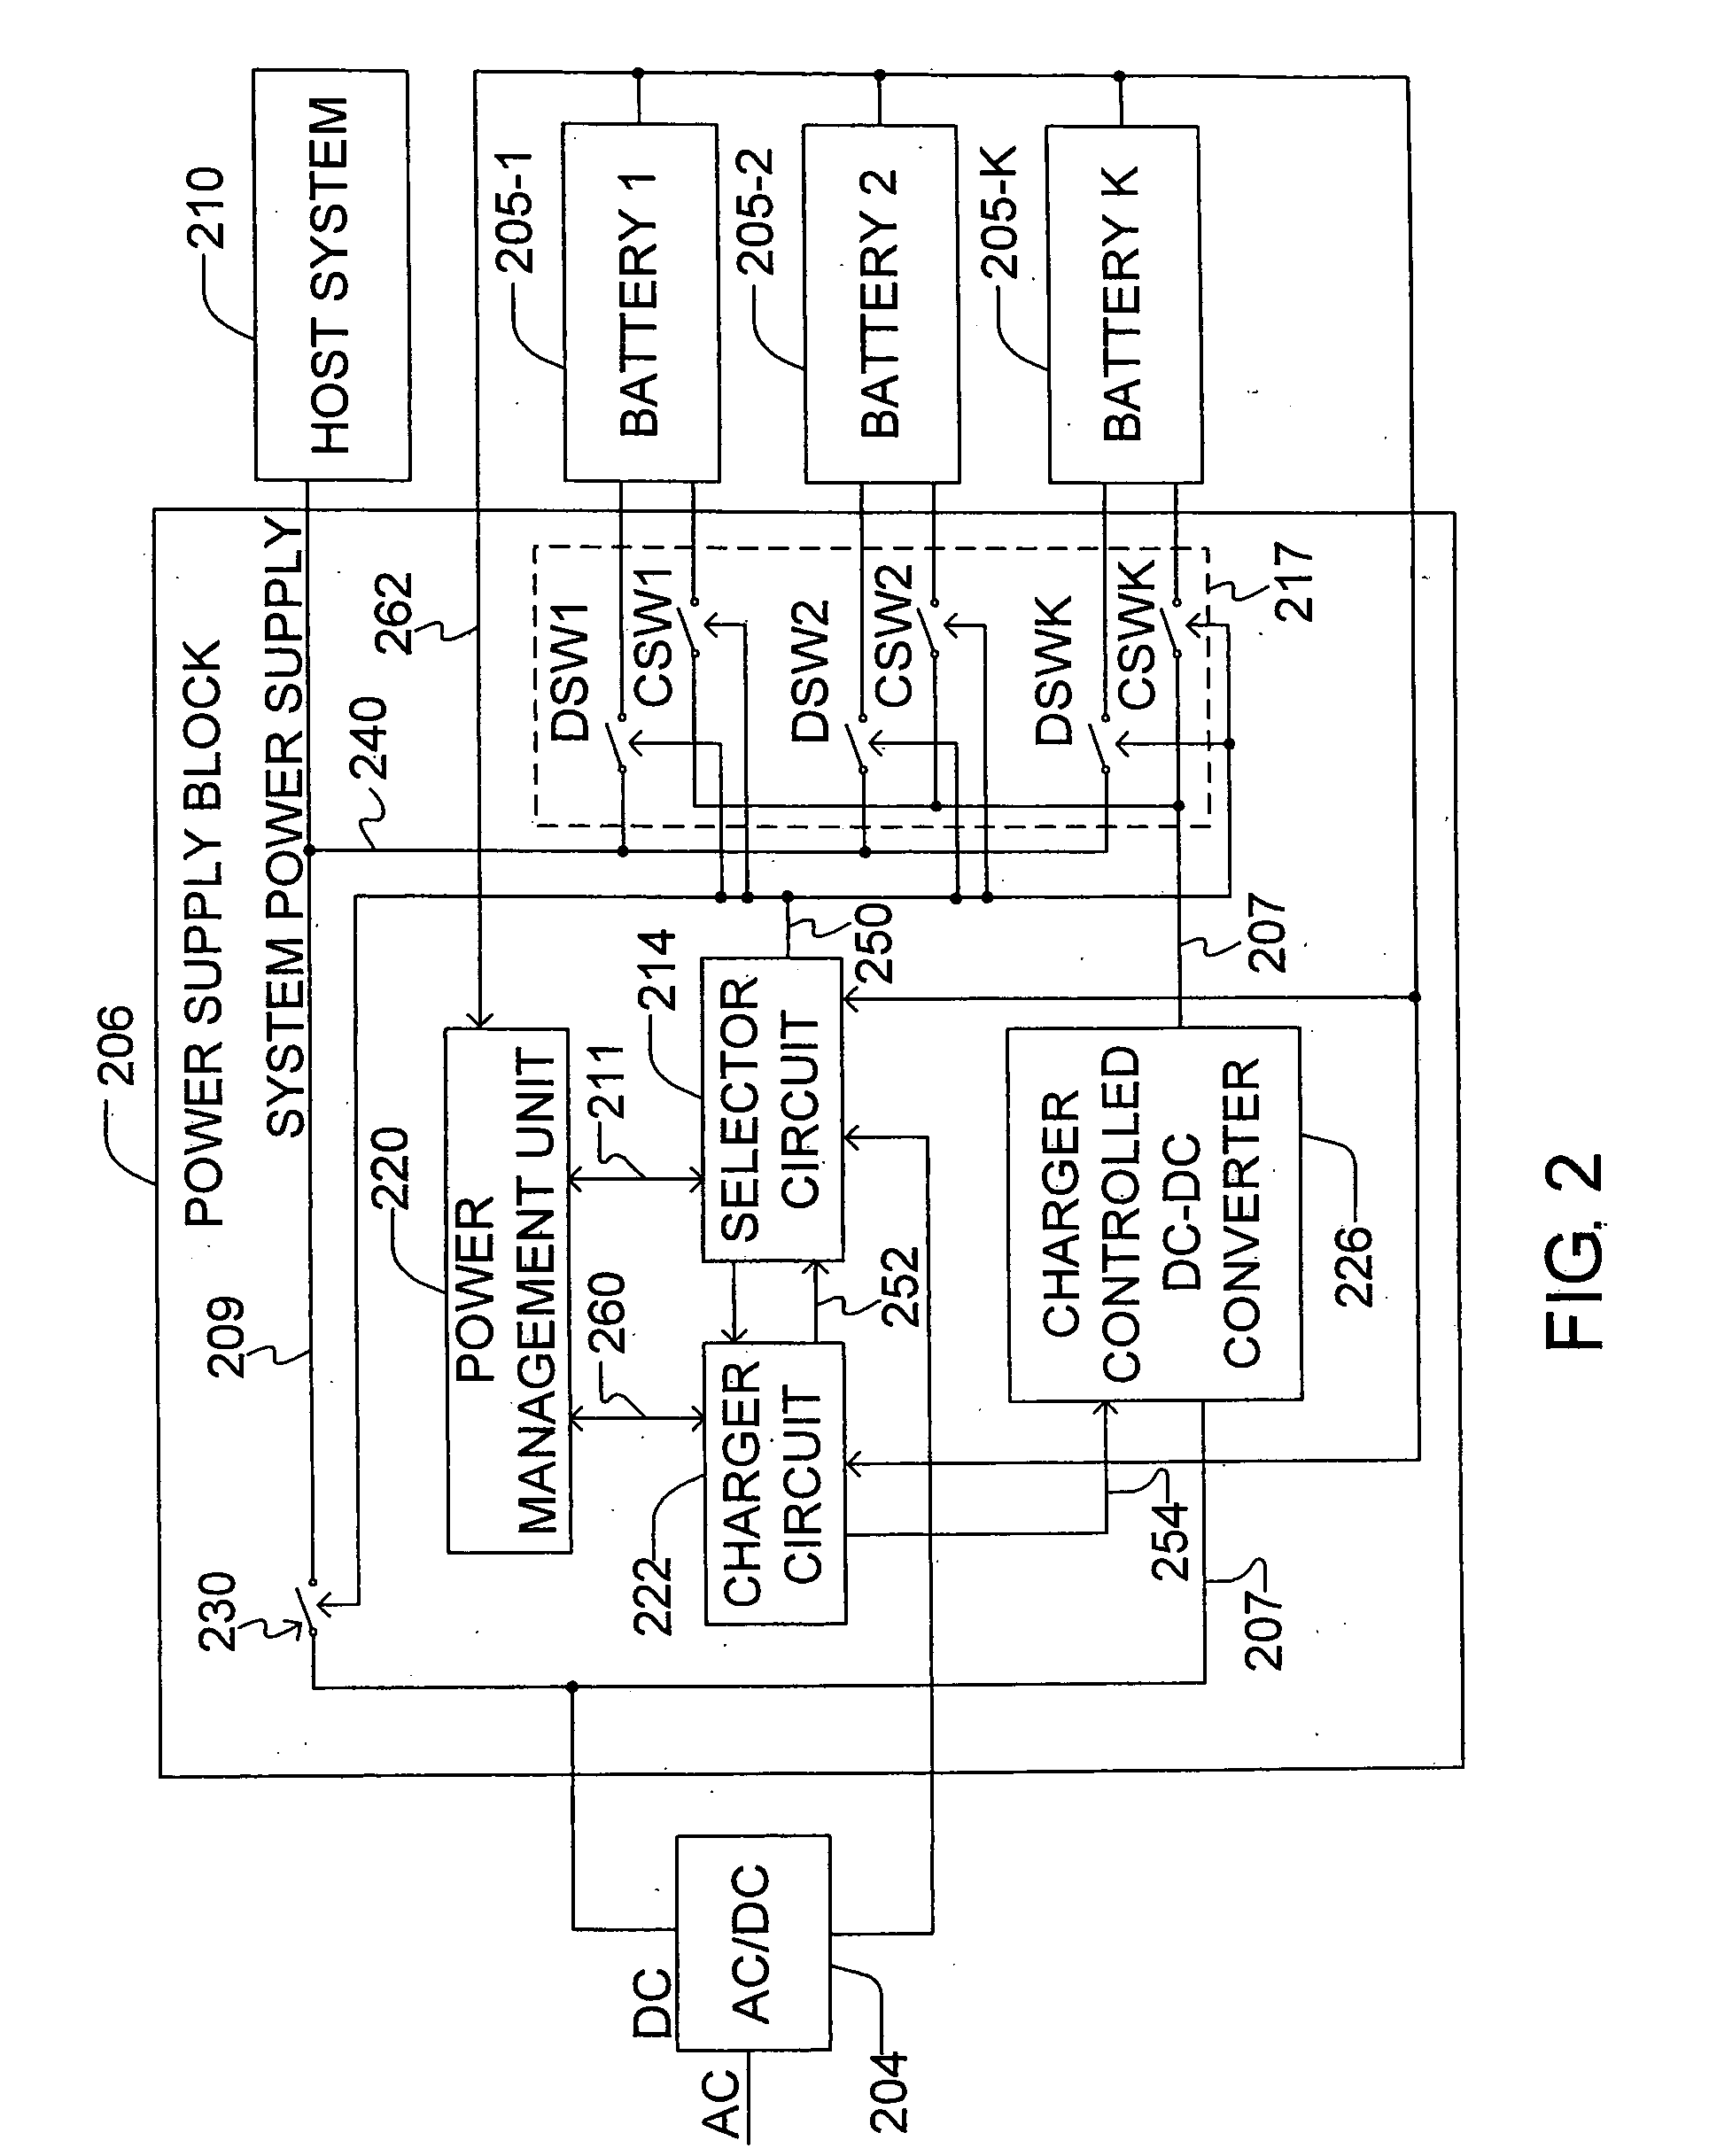 Selector circuit for power management in multiple battery systems